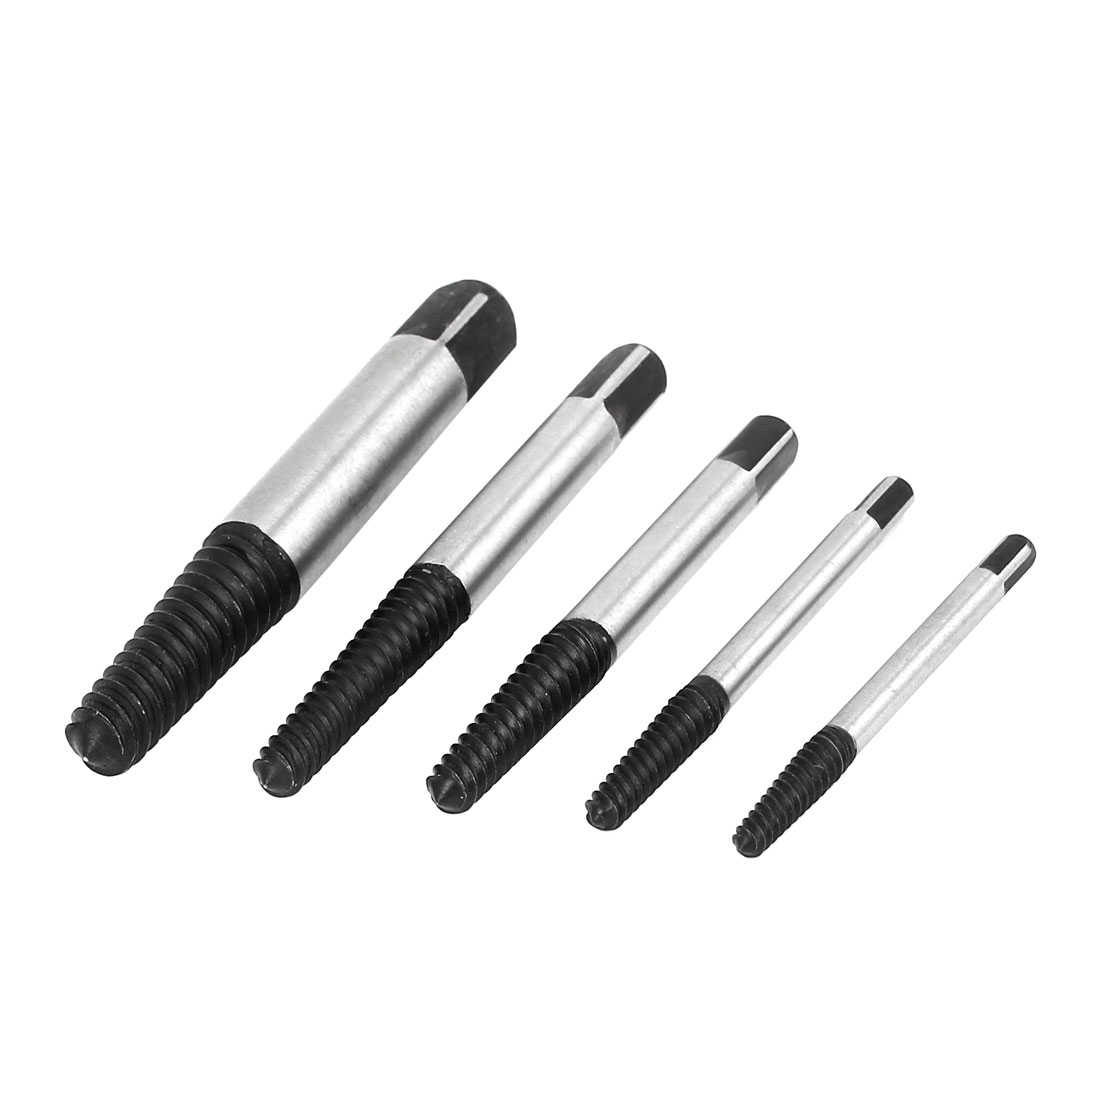 Unique Bargains 5pcs 4mm-18mm Screw Extractor Set Damaged Pipe Bolt Stud Remover Removal Tool